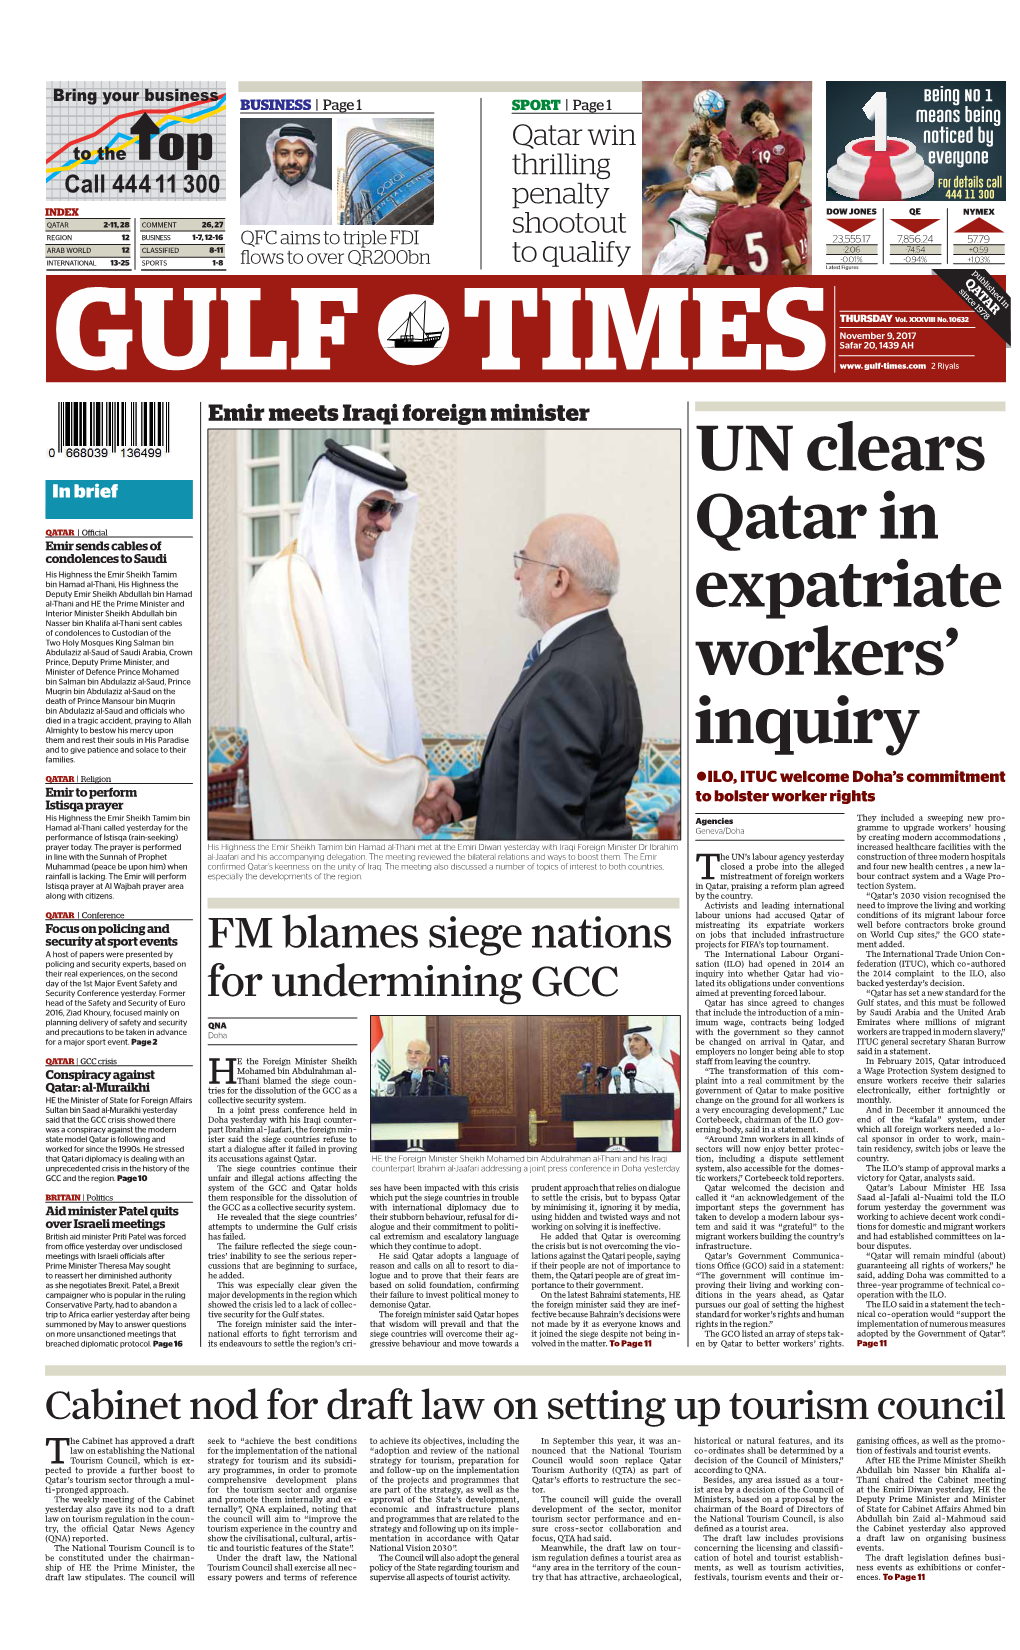 UN Clears Qatar in Expatriate Workers' Inquiry